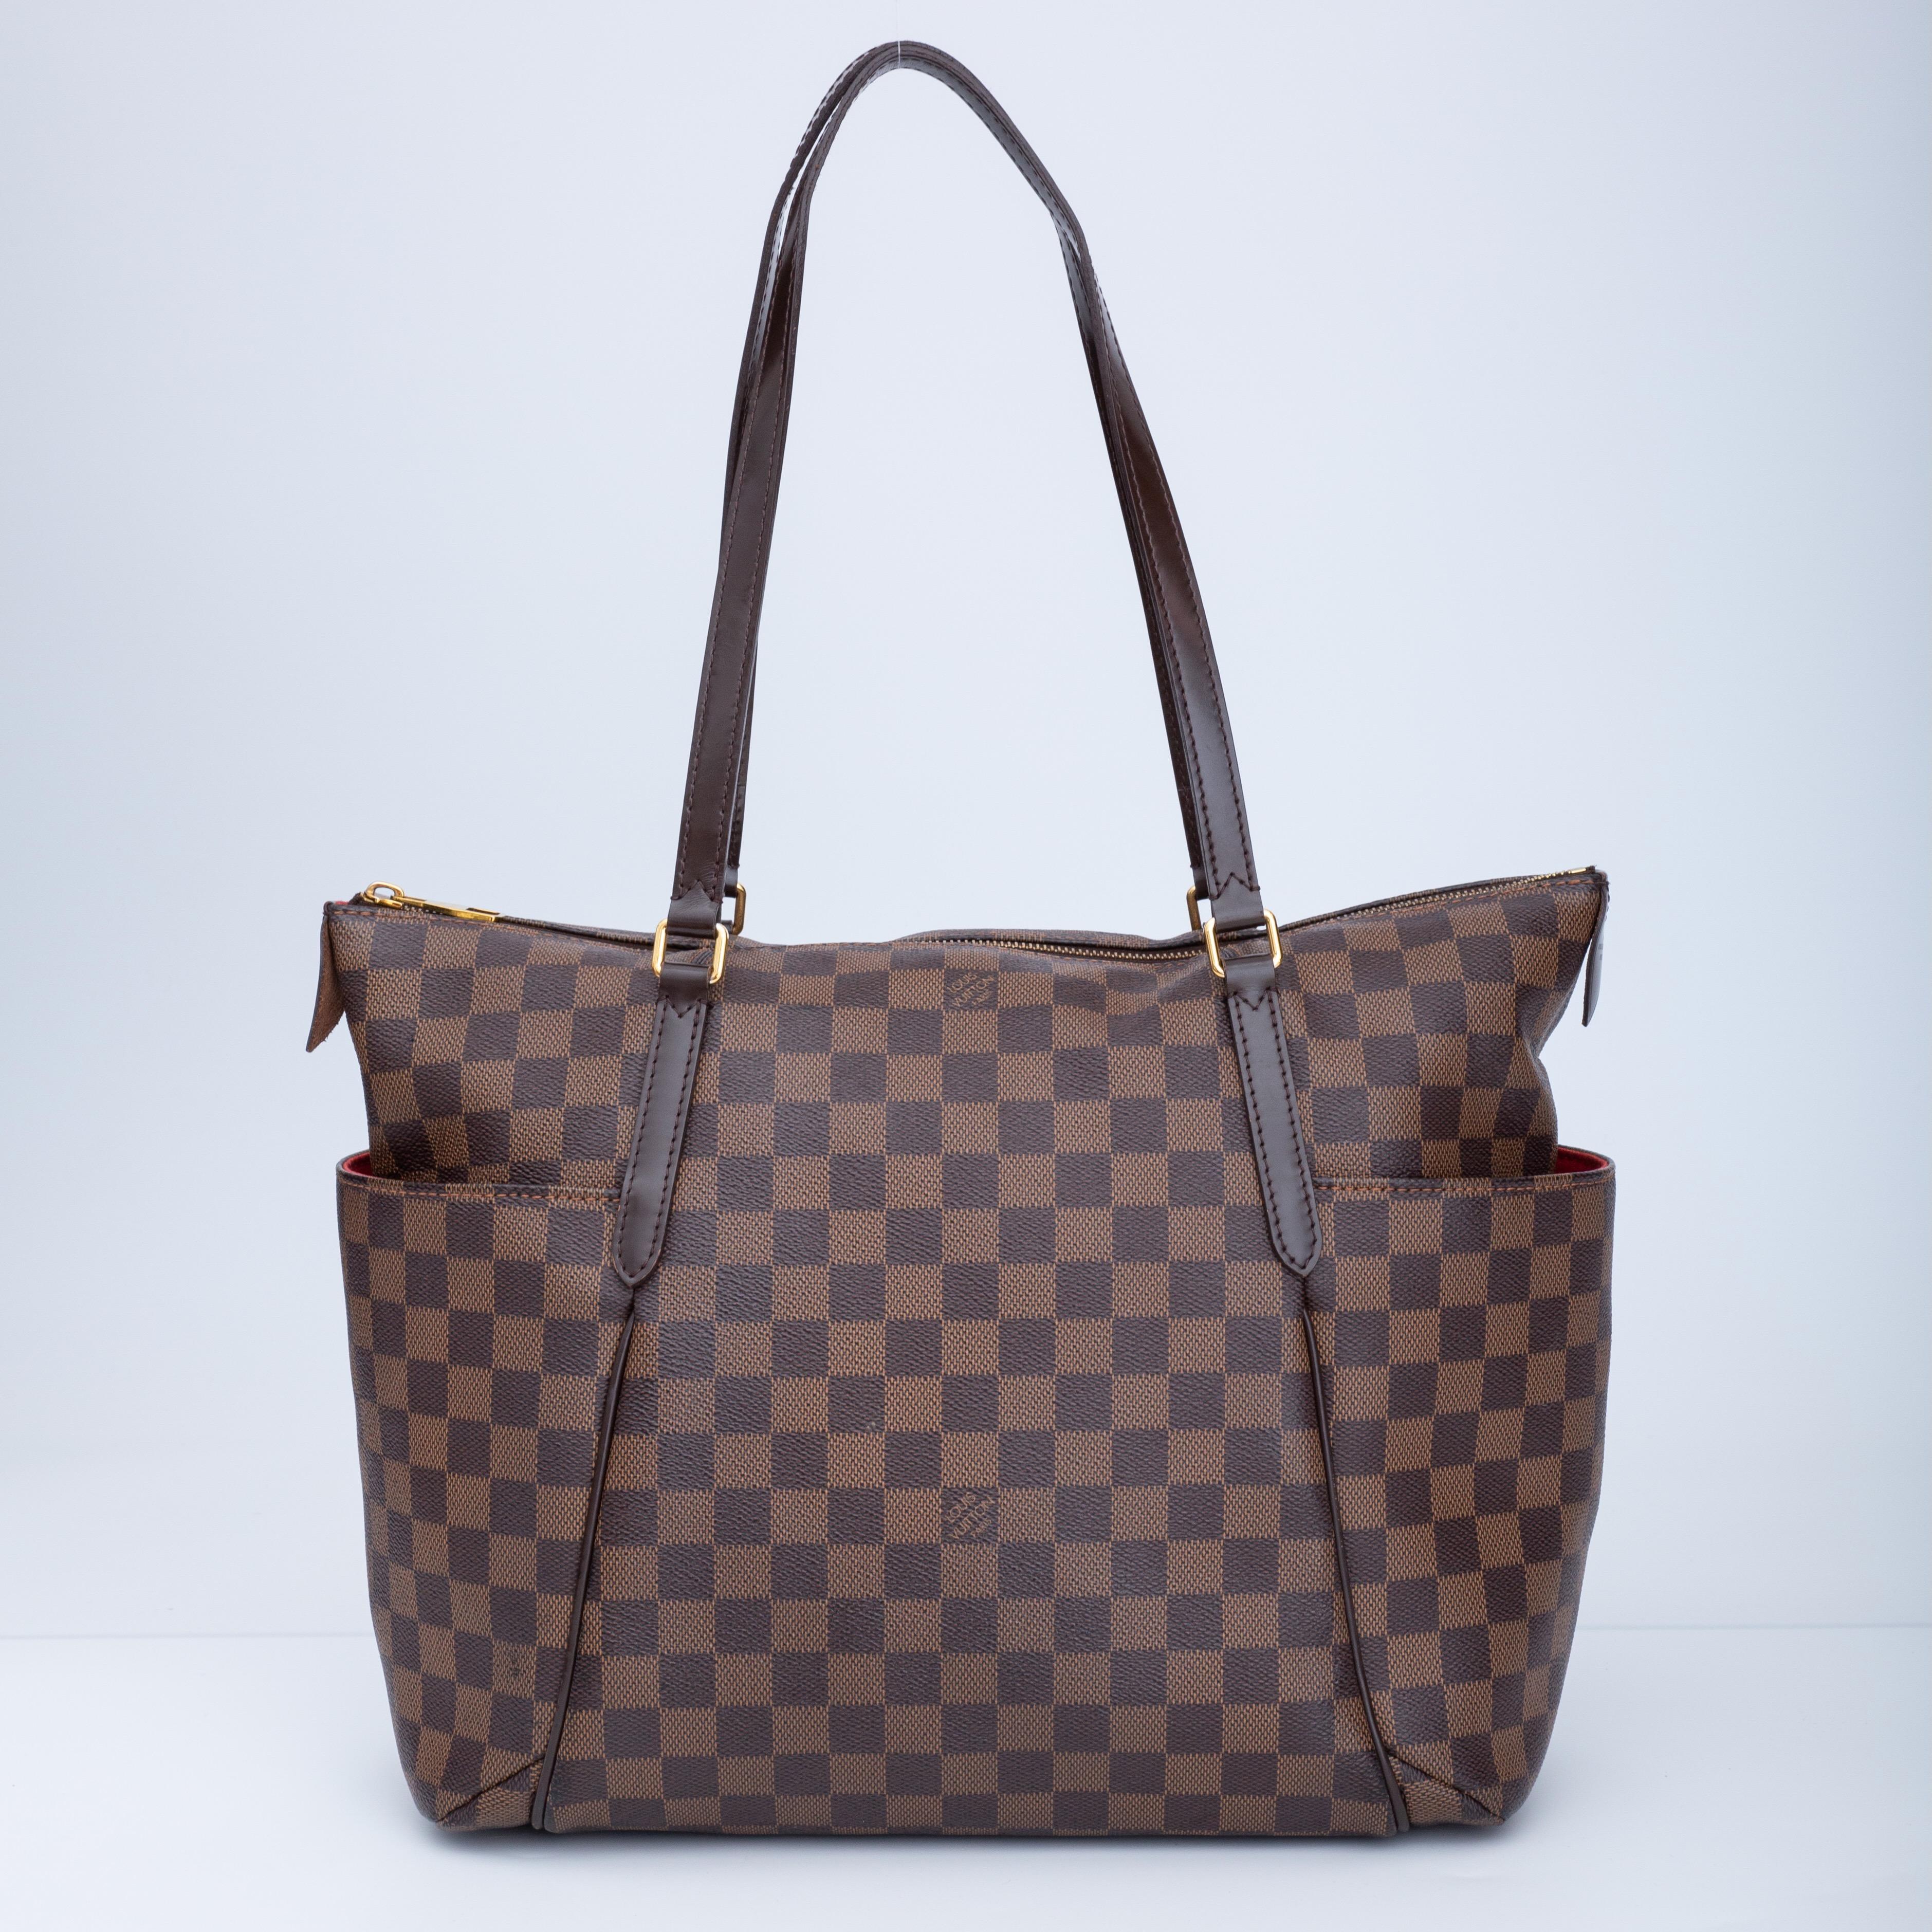 The bag is made with coated canvas with damier ebene print. Damier means checkerboard in French.This bag features dark brown leather shoulder straps, polished brass hardware, bucket pockets on the sides, top zip closure and a red fabric interior.